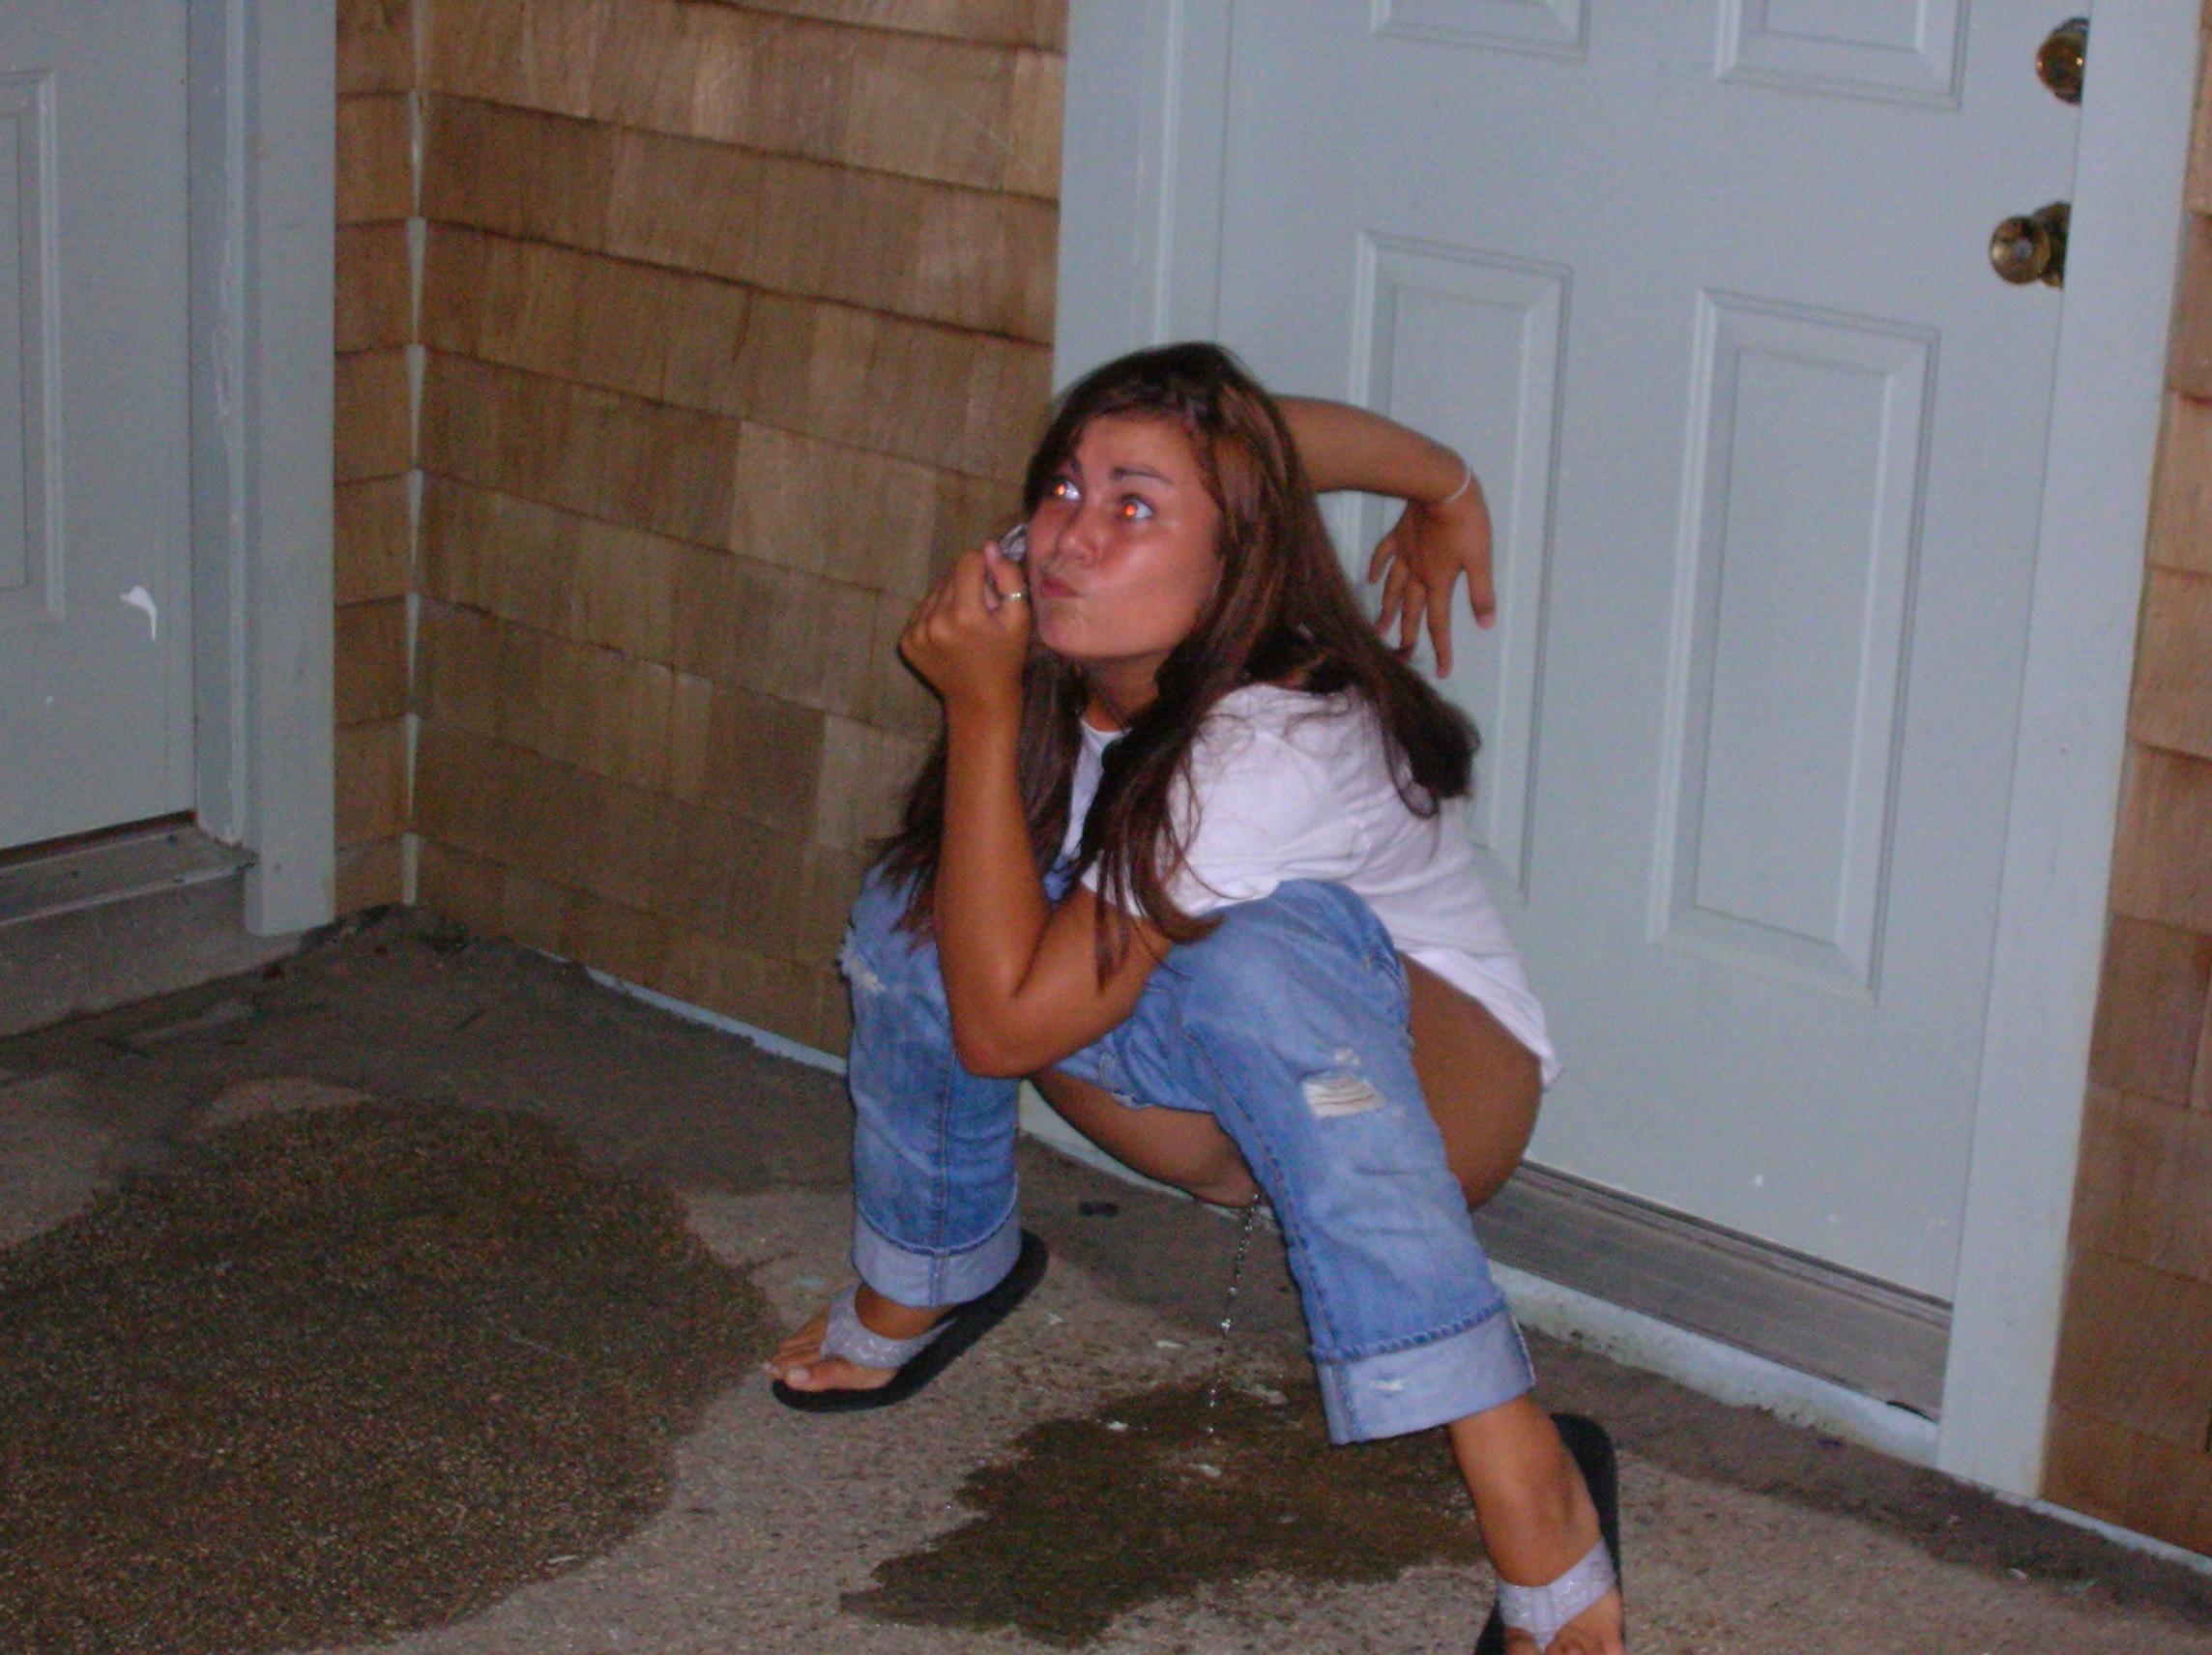 Girl caught peeing pictures